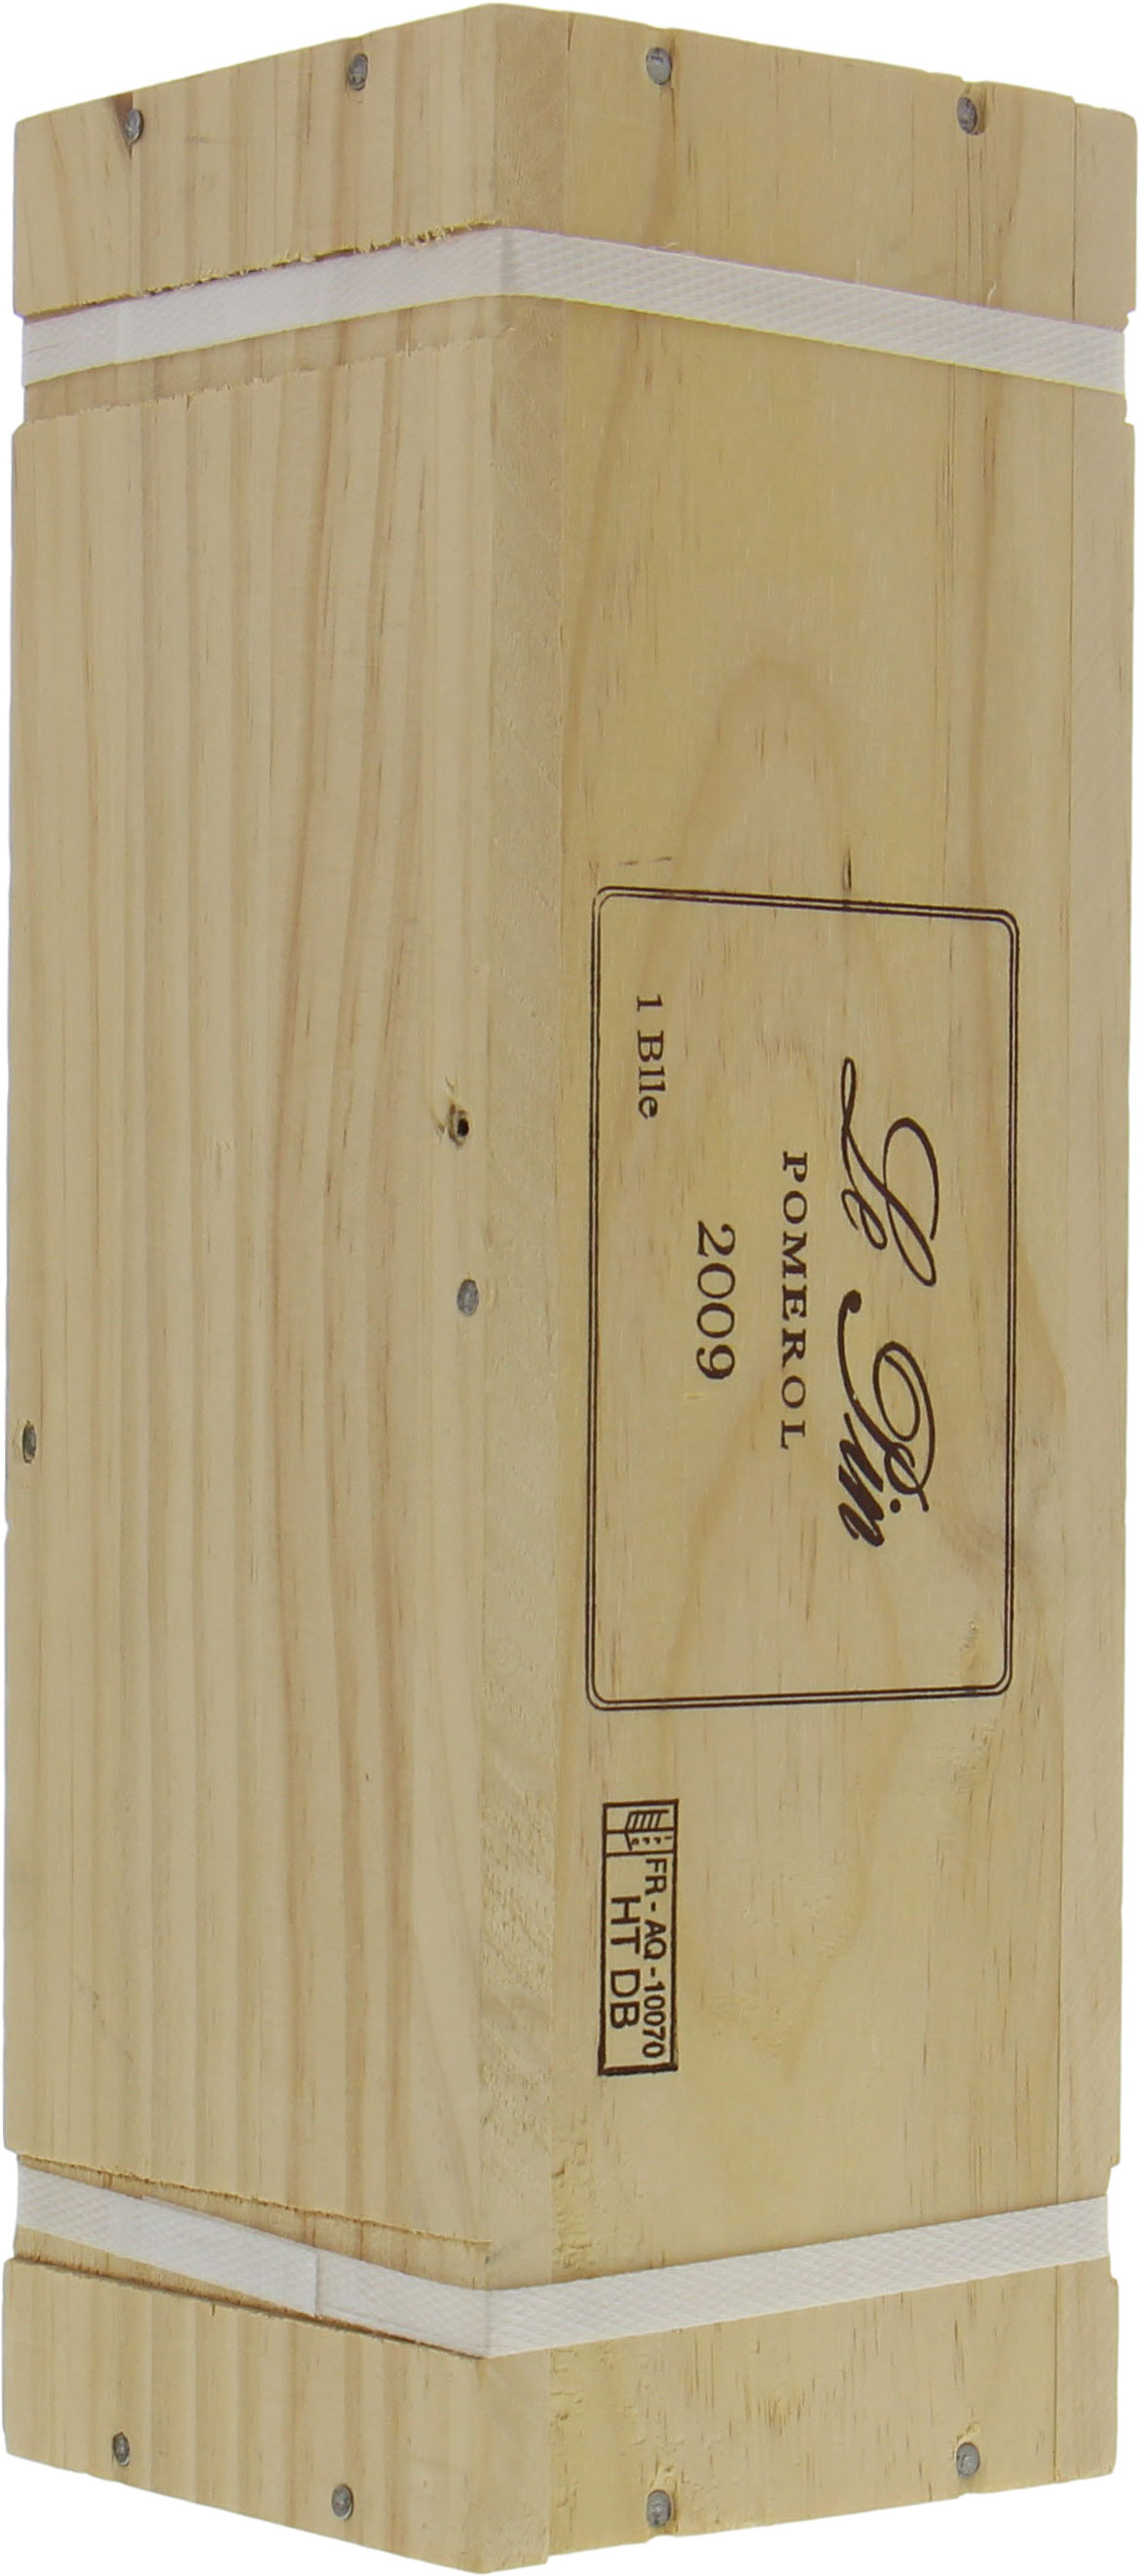 Chateau Le Pin - Chateau Le Pin 2009 From Original Wooden Case